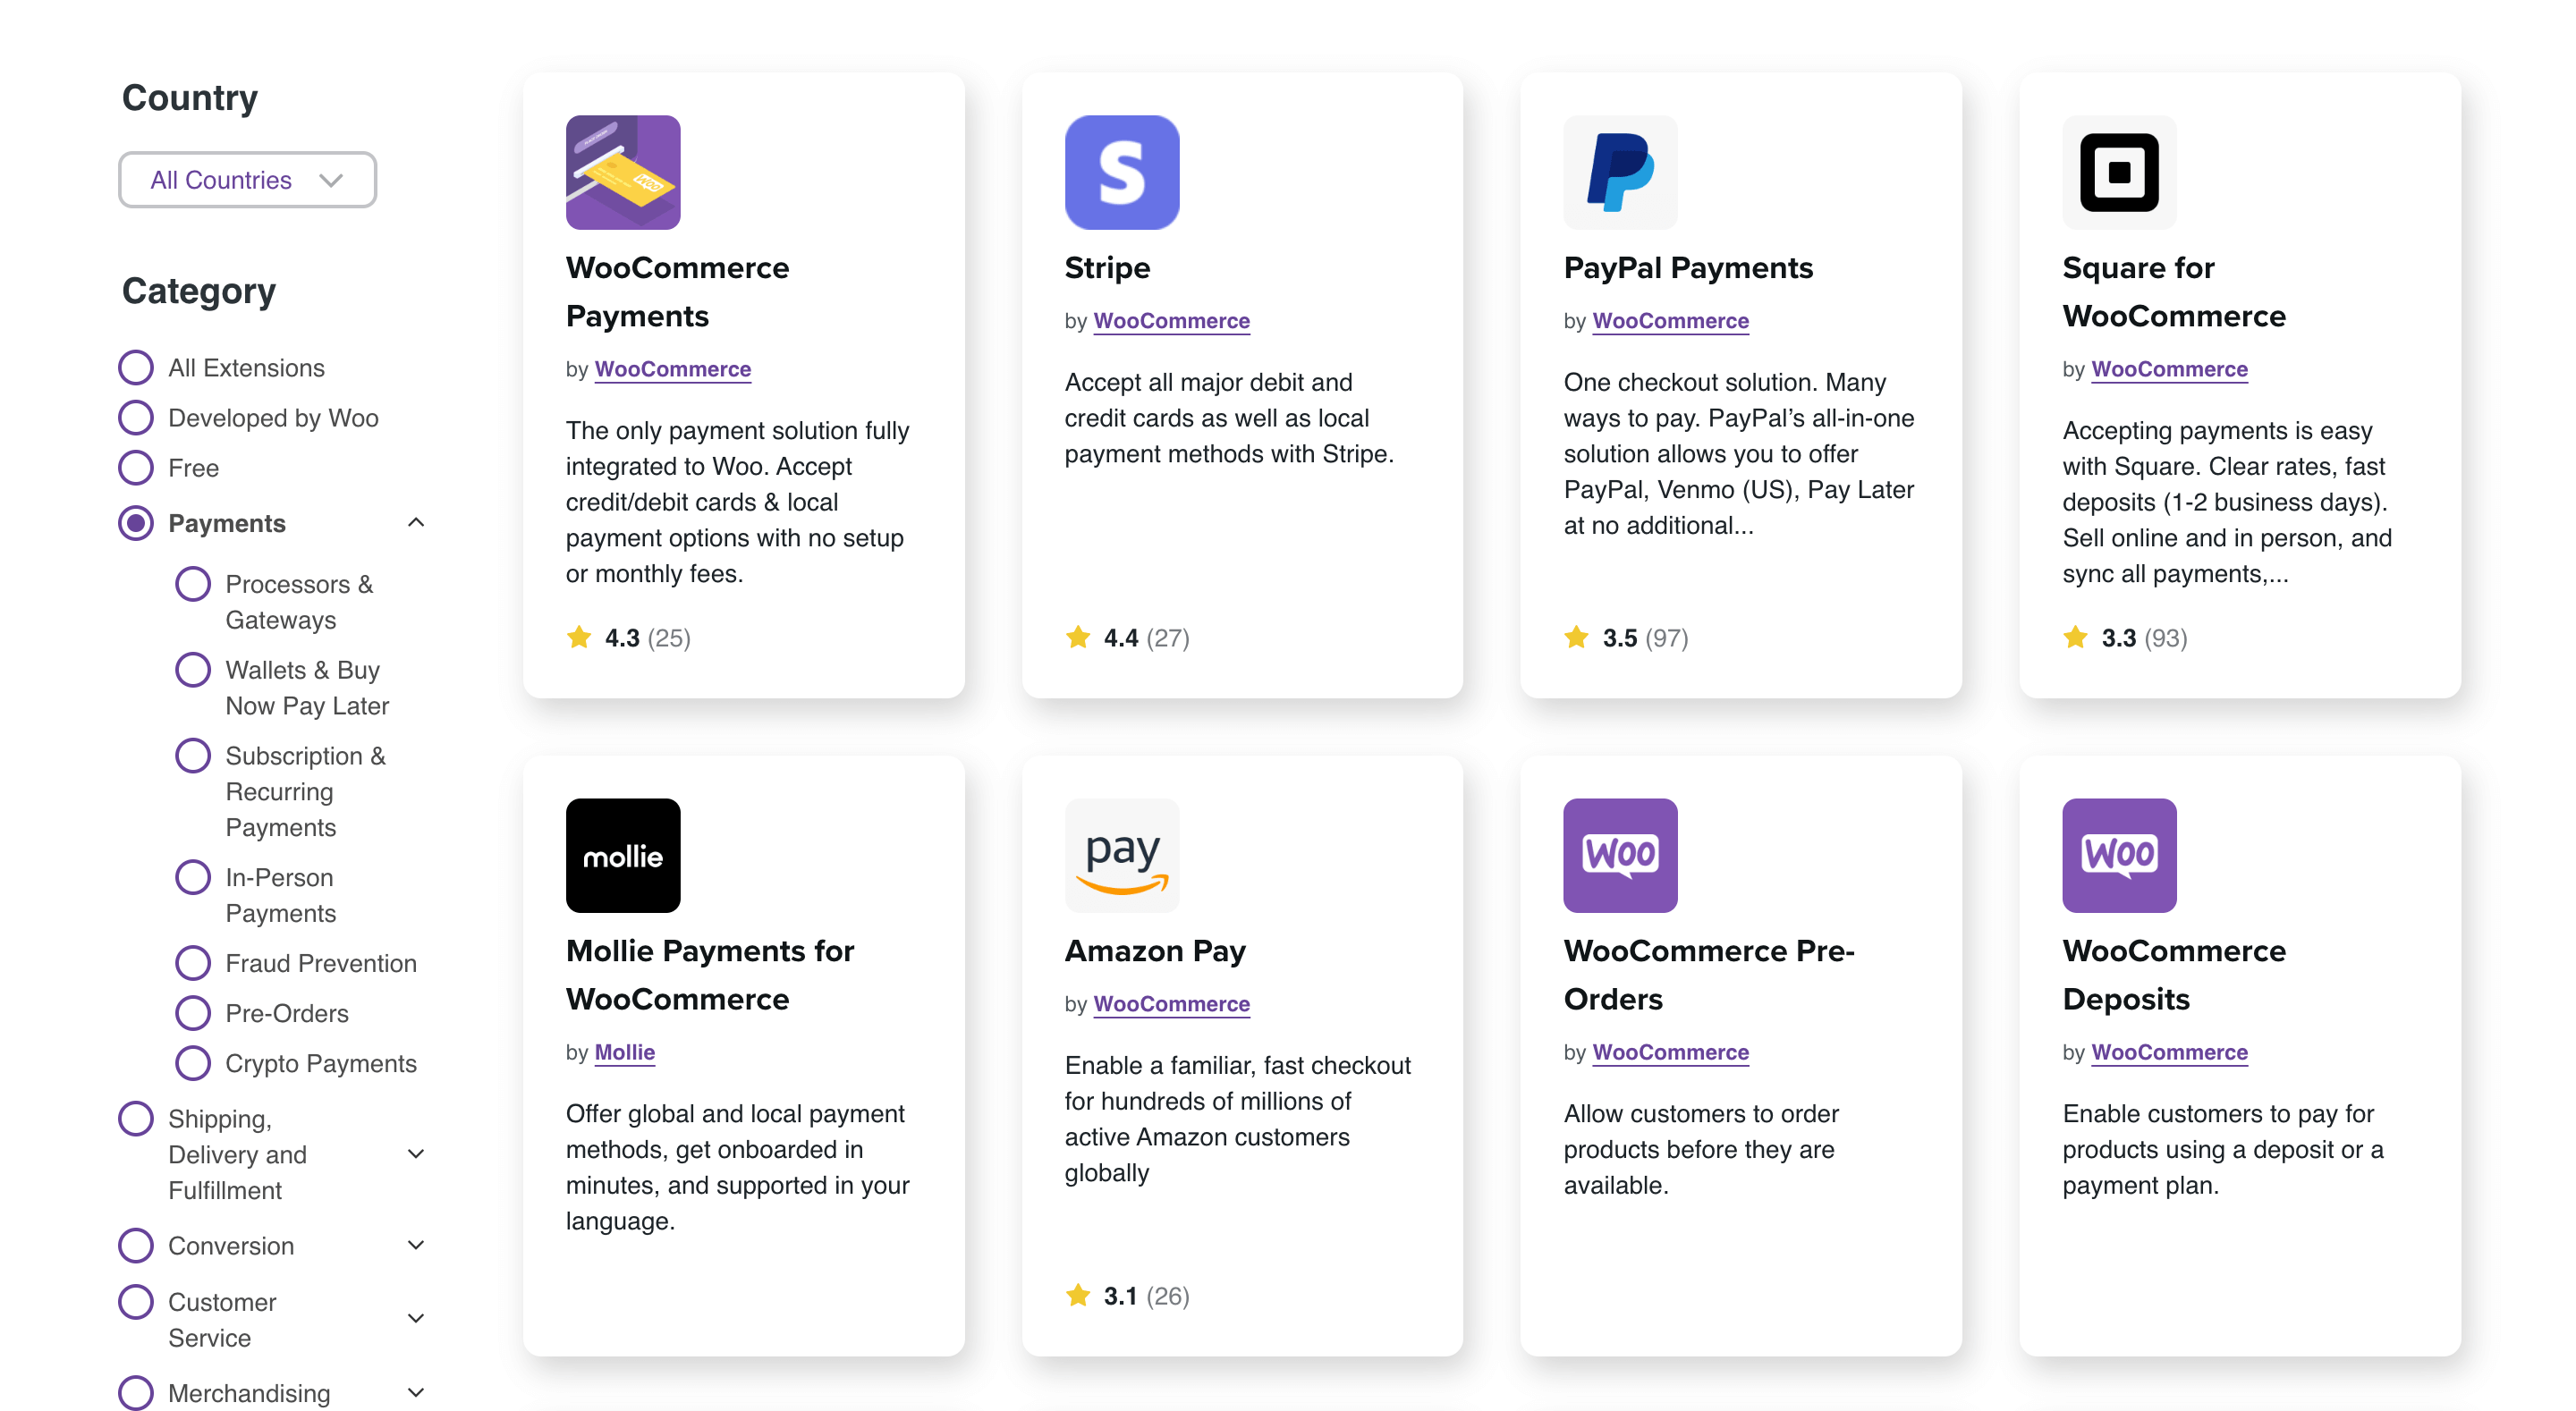 WooCommerce payment extensions